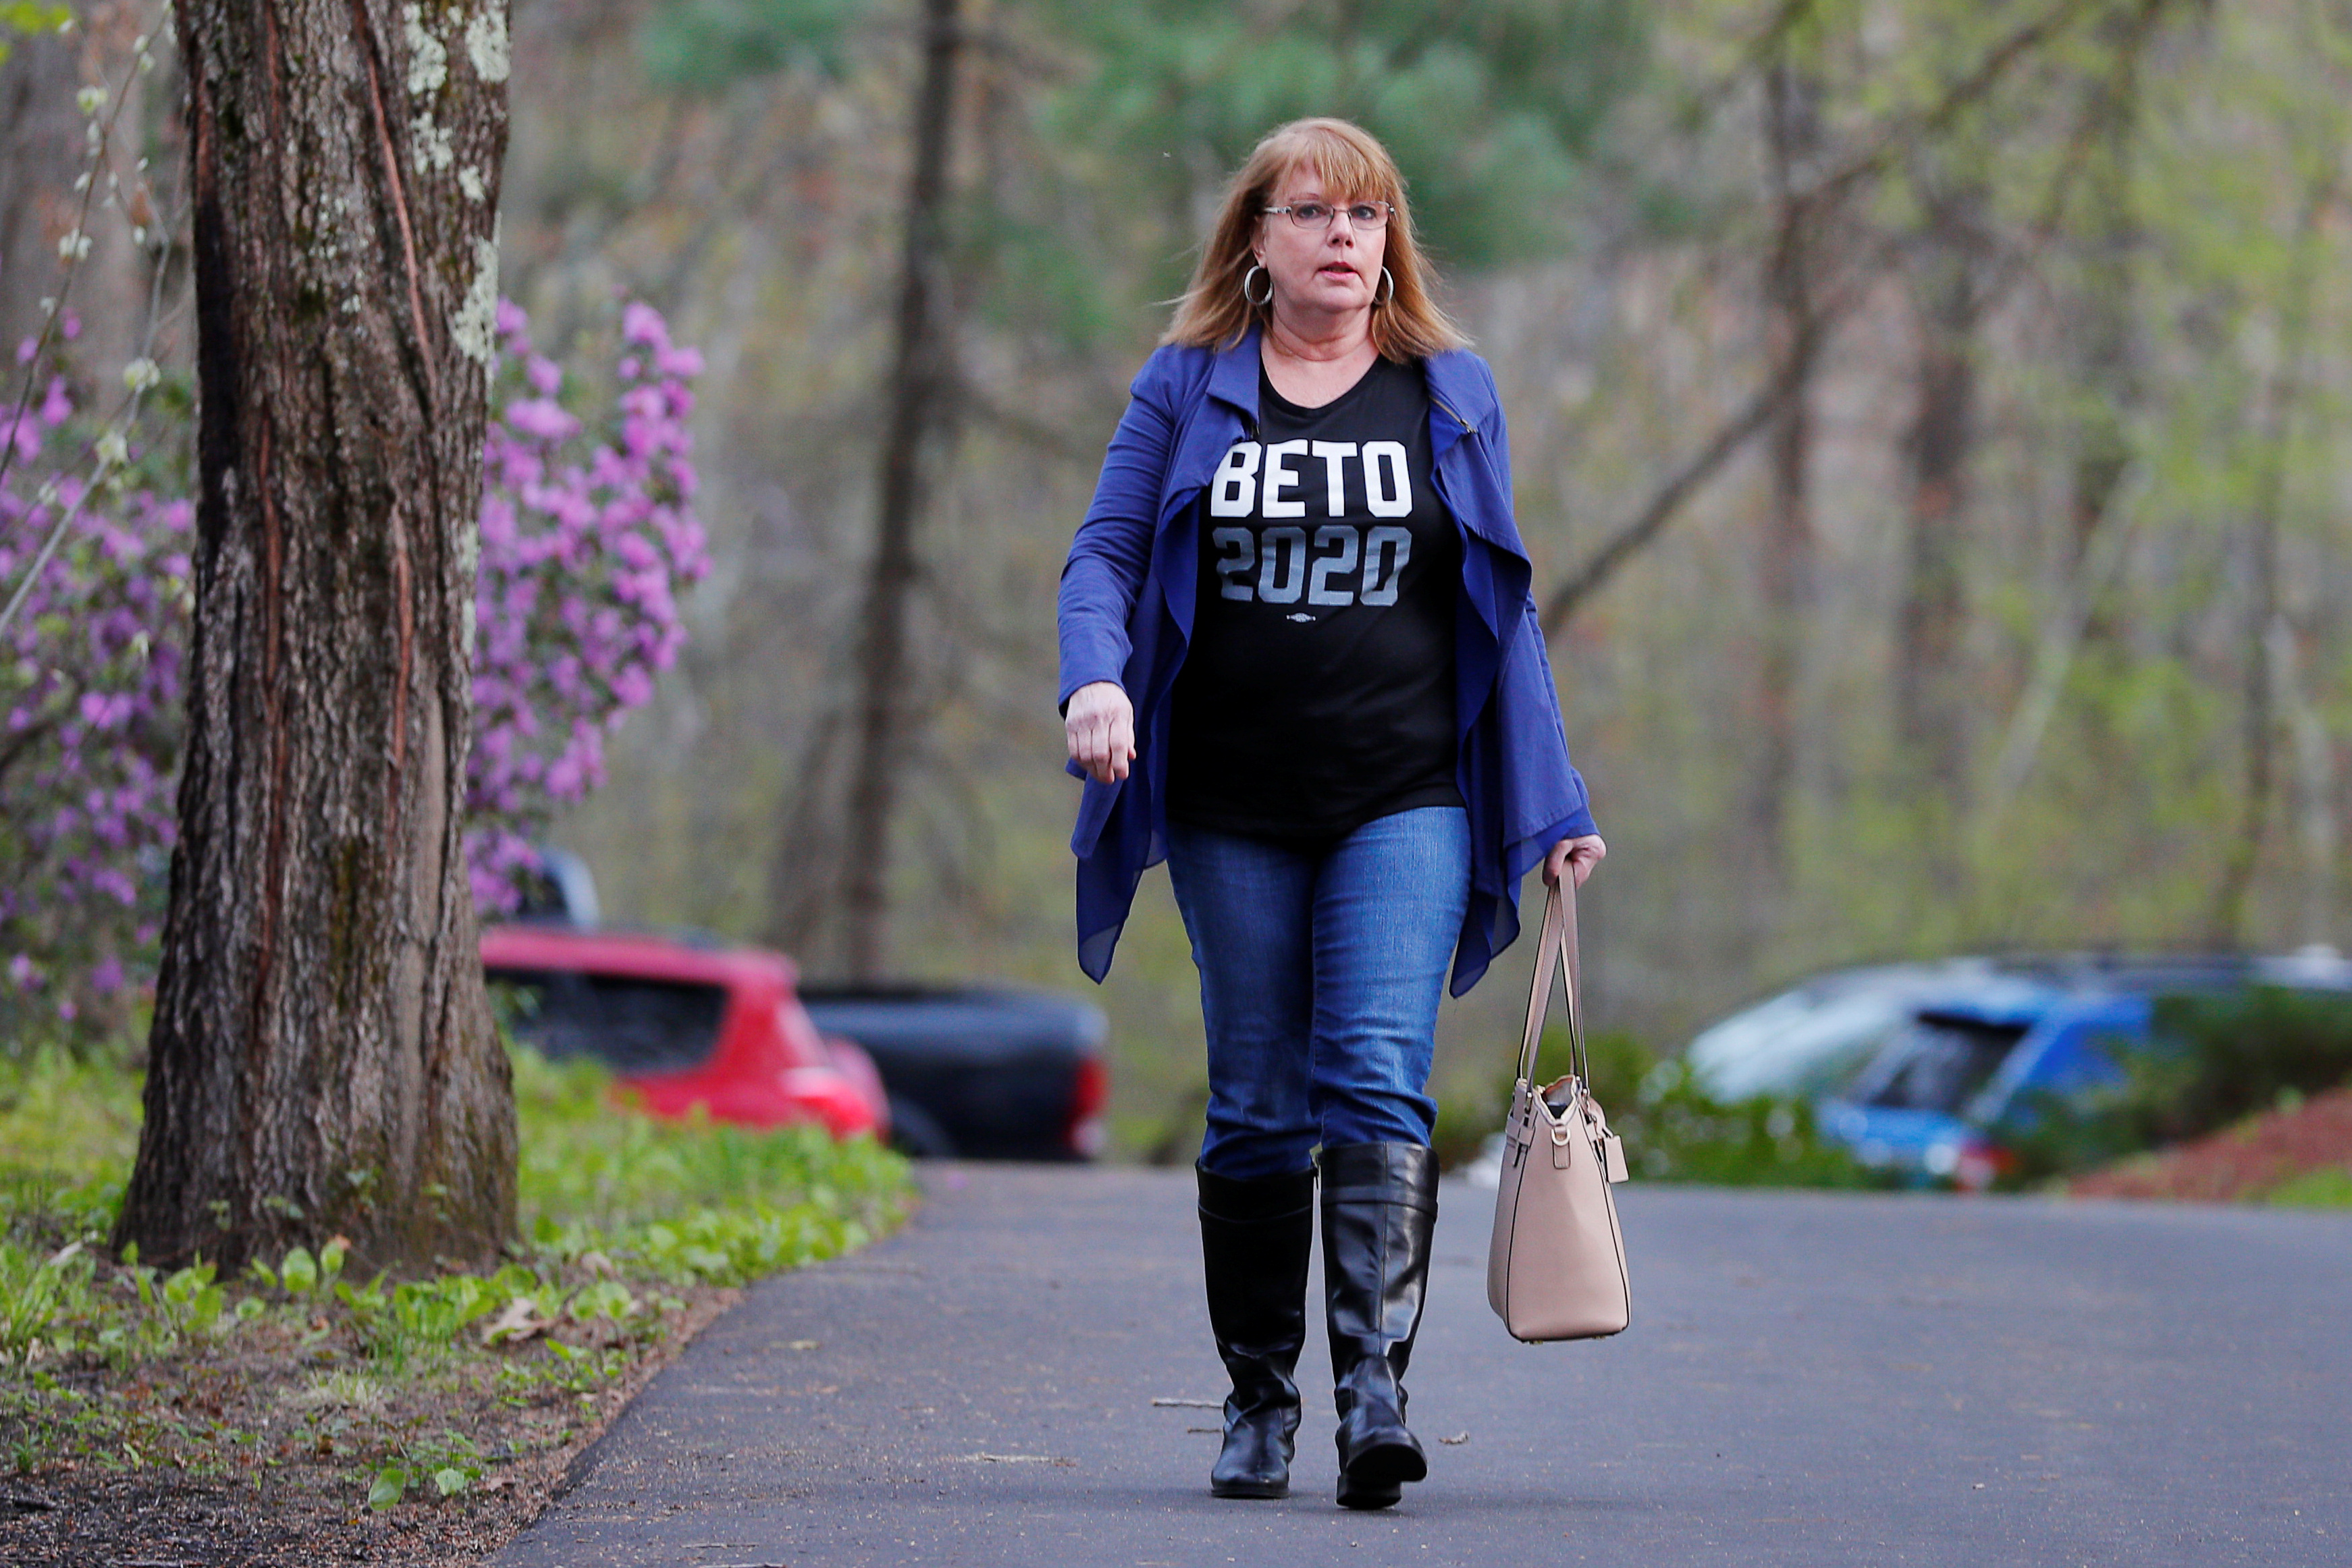 A woman wearing a "Beto 2020" t-shirt arrives for a a campaign house party with Democratic 2020 U.S. presidential candidate and former U.S. Representative Beto O’Rourke in Salem, New Hampshire, U.S., May 9, 2019. REUTERS/Brian Snyder 